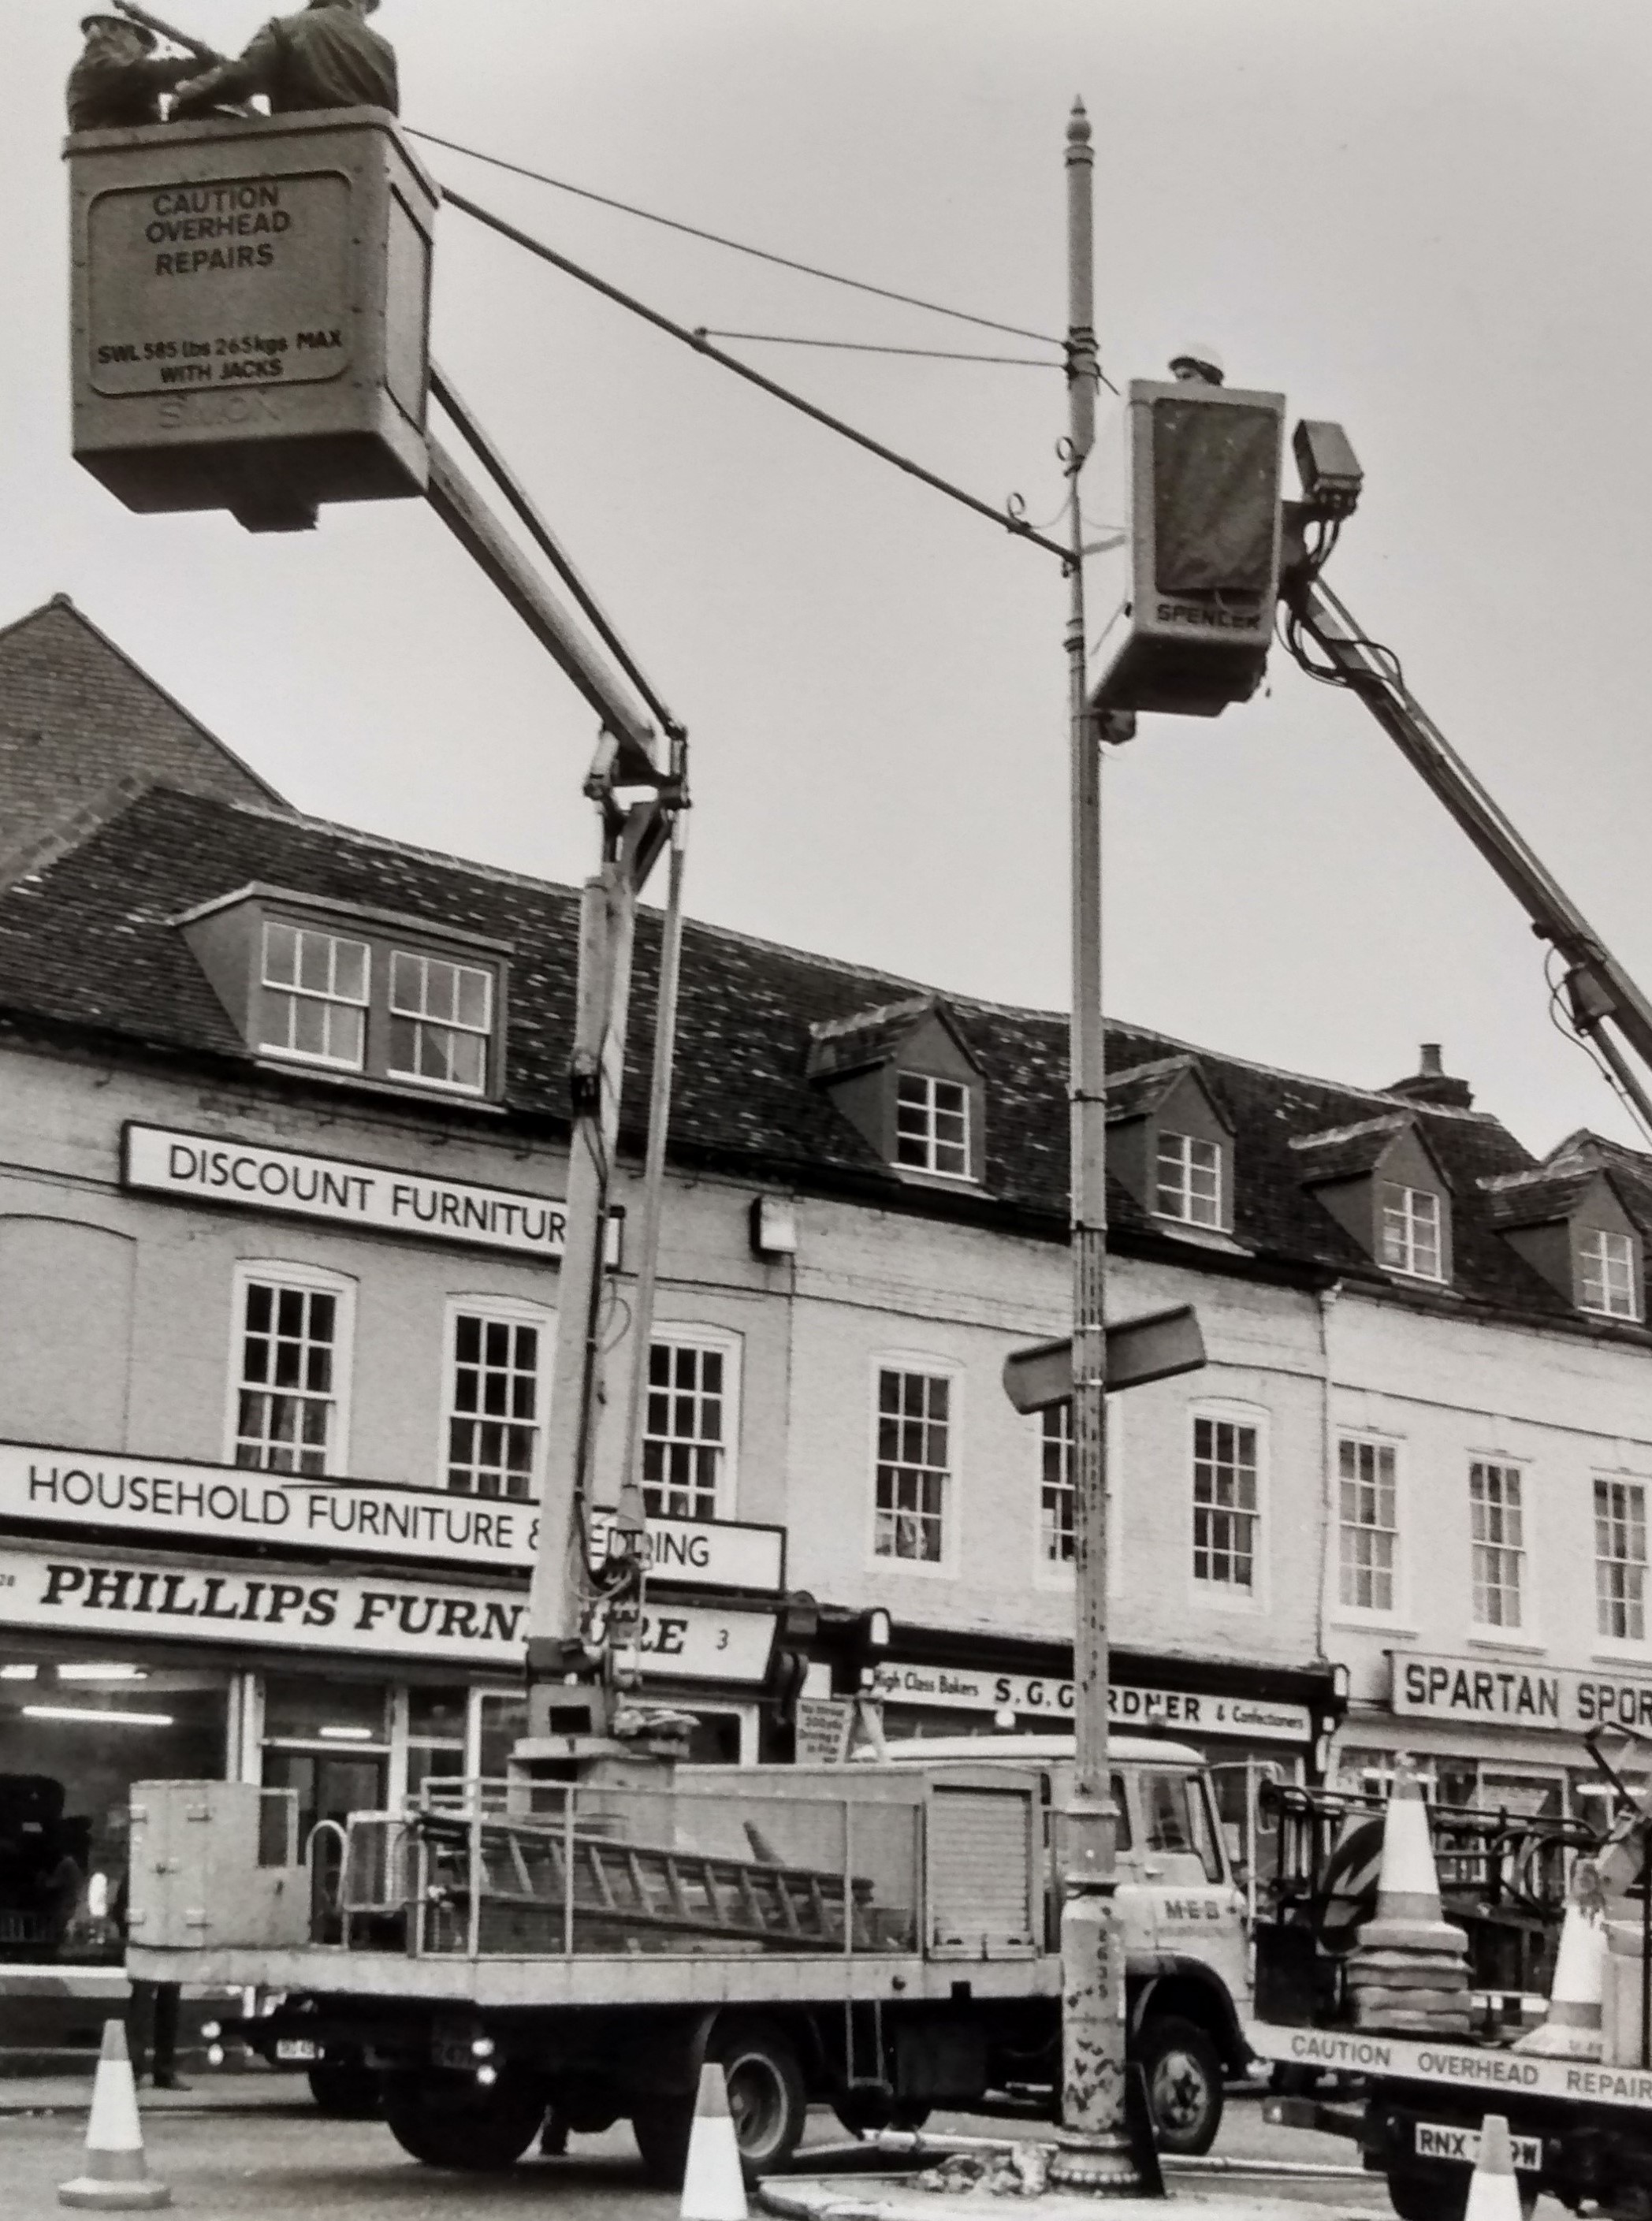 It’s December 1983 and the cast-iron lamppost in the Cornmarket is being removed to make way “for traffic improvements”